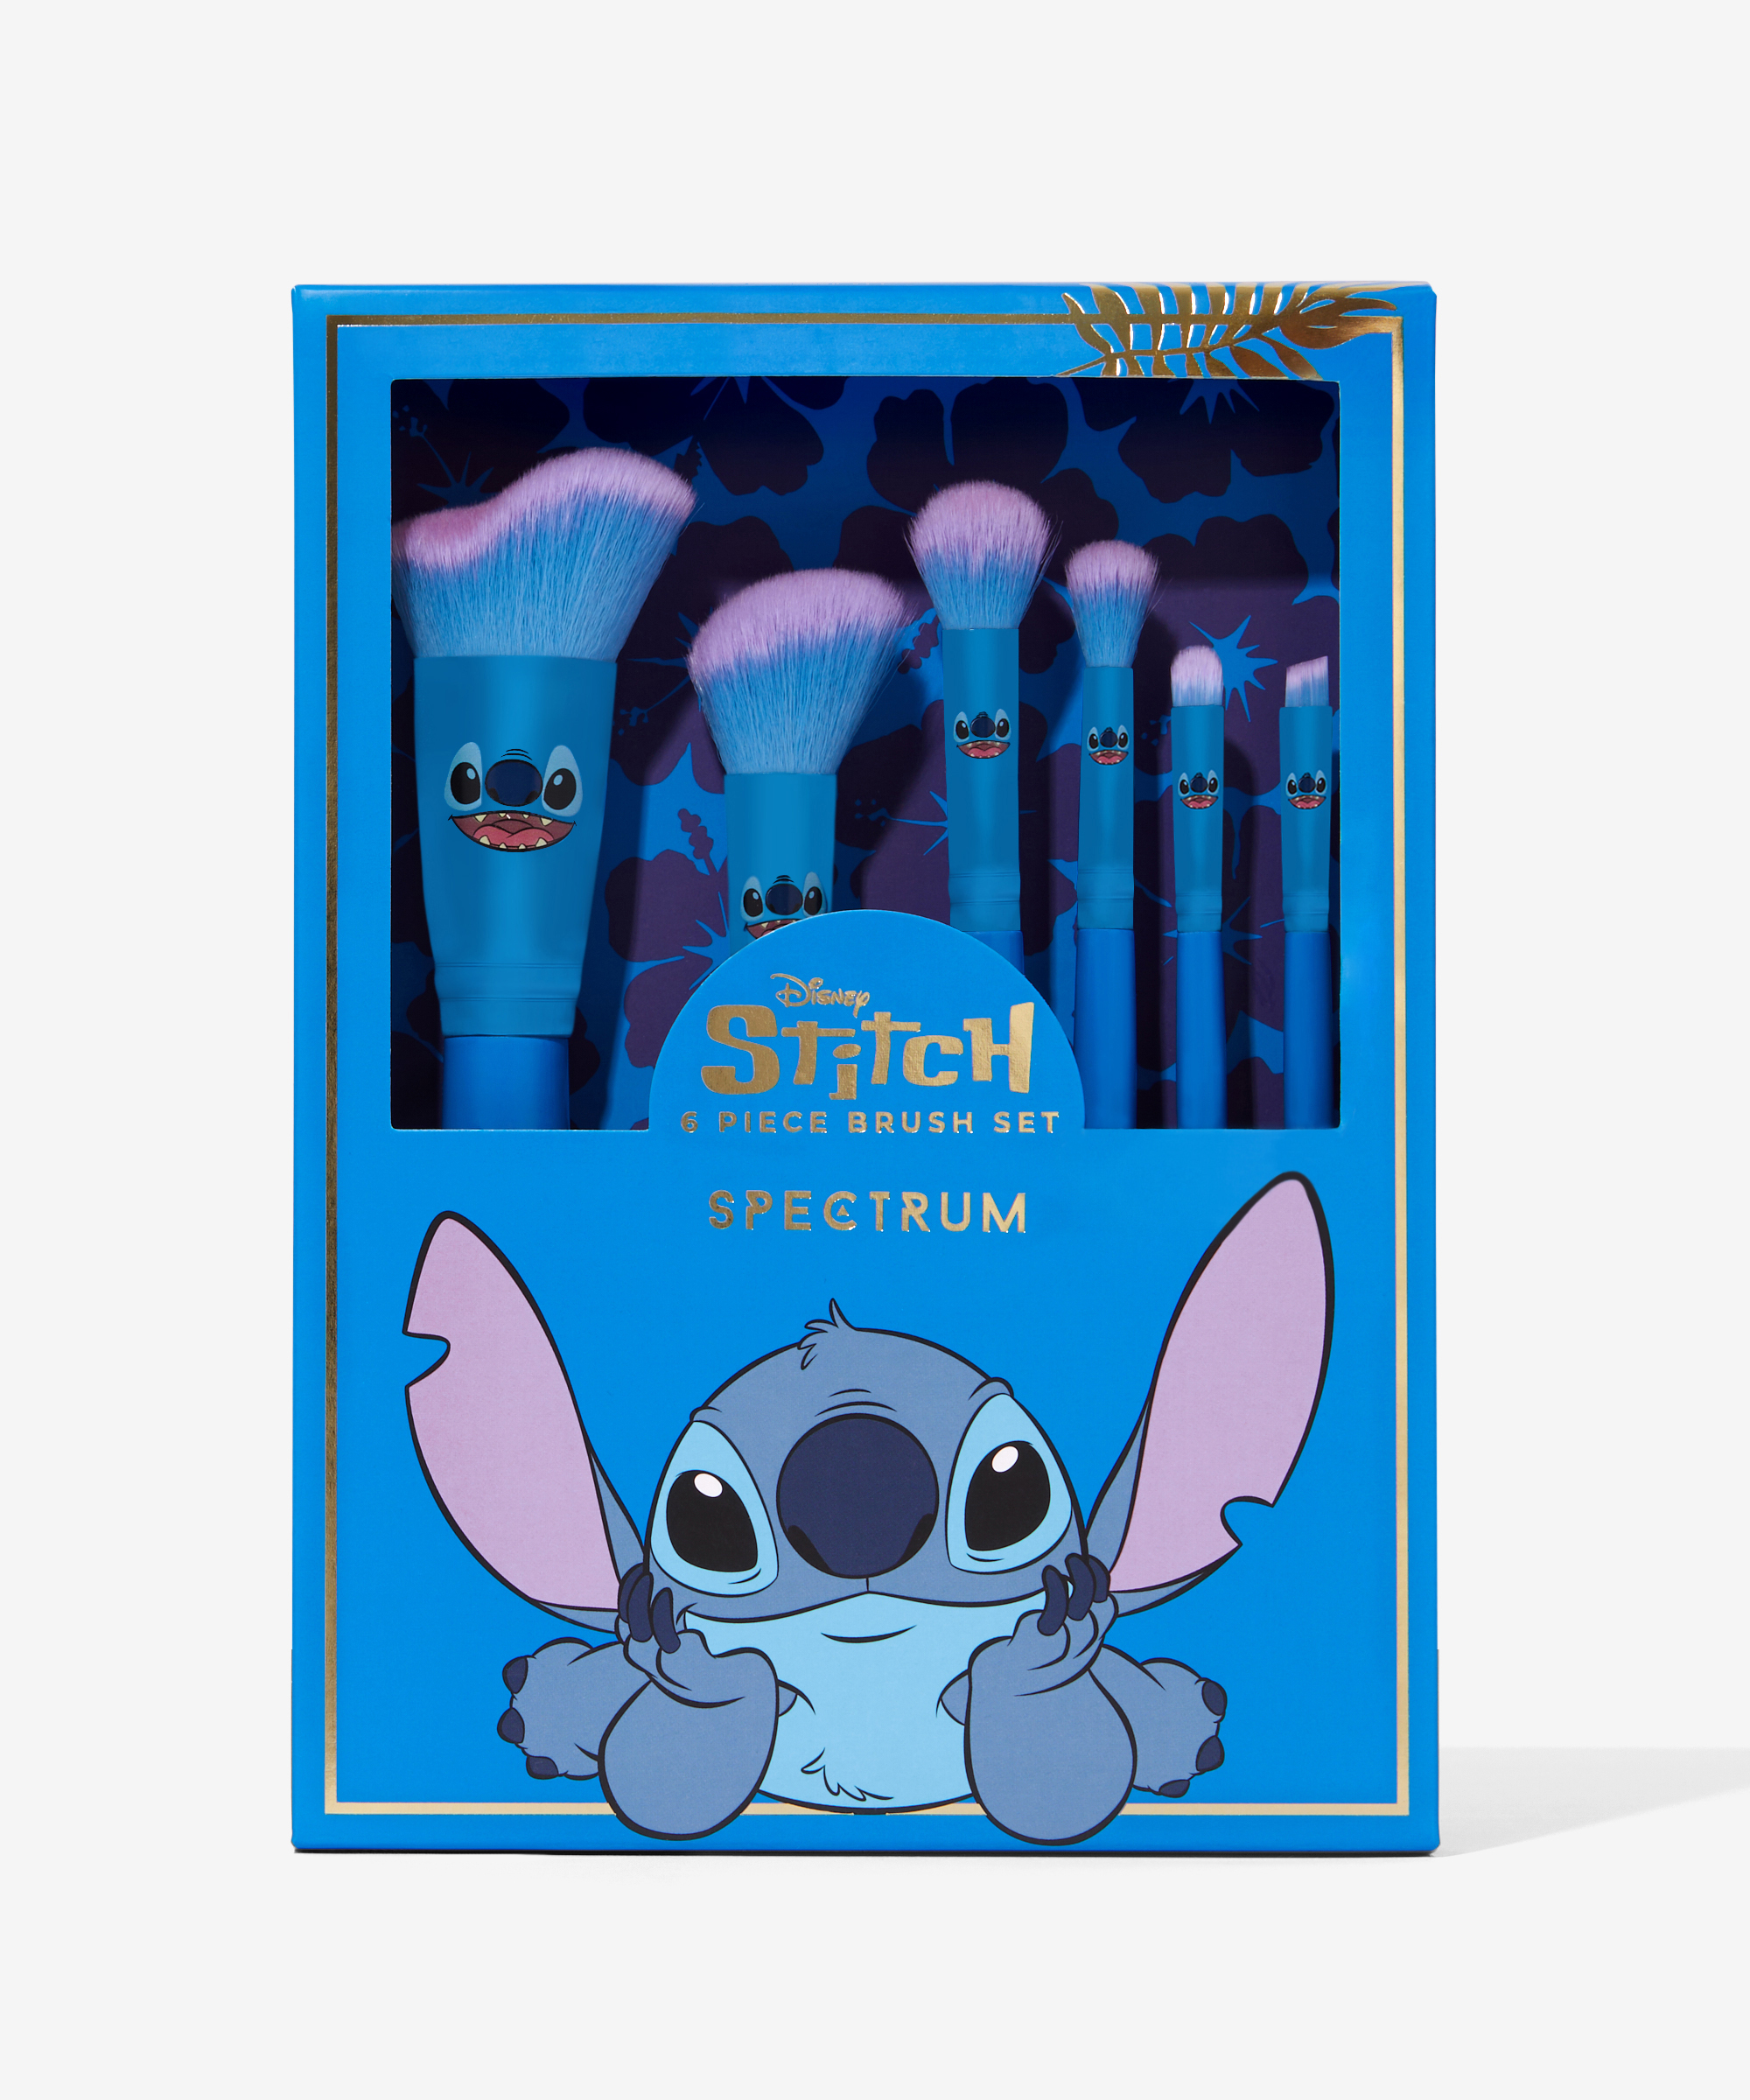 Spectrum Collections Ride the Wave 6 Piece Stitch Brush Set at